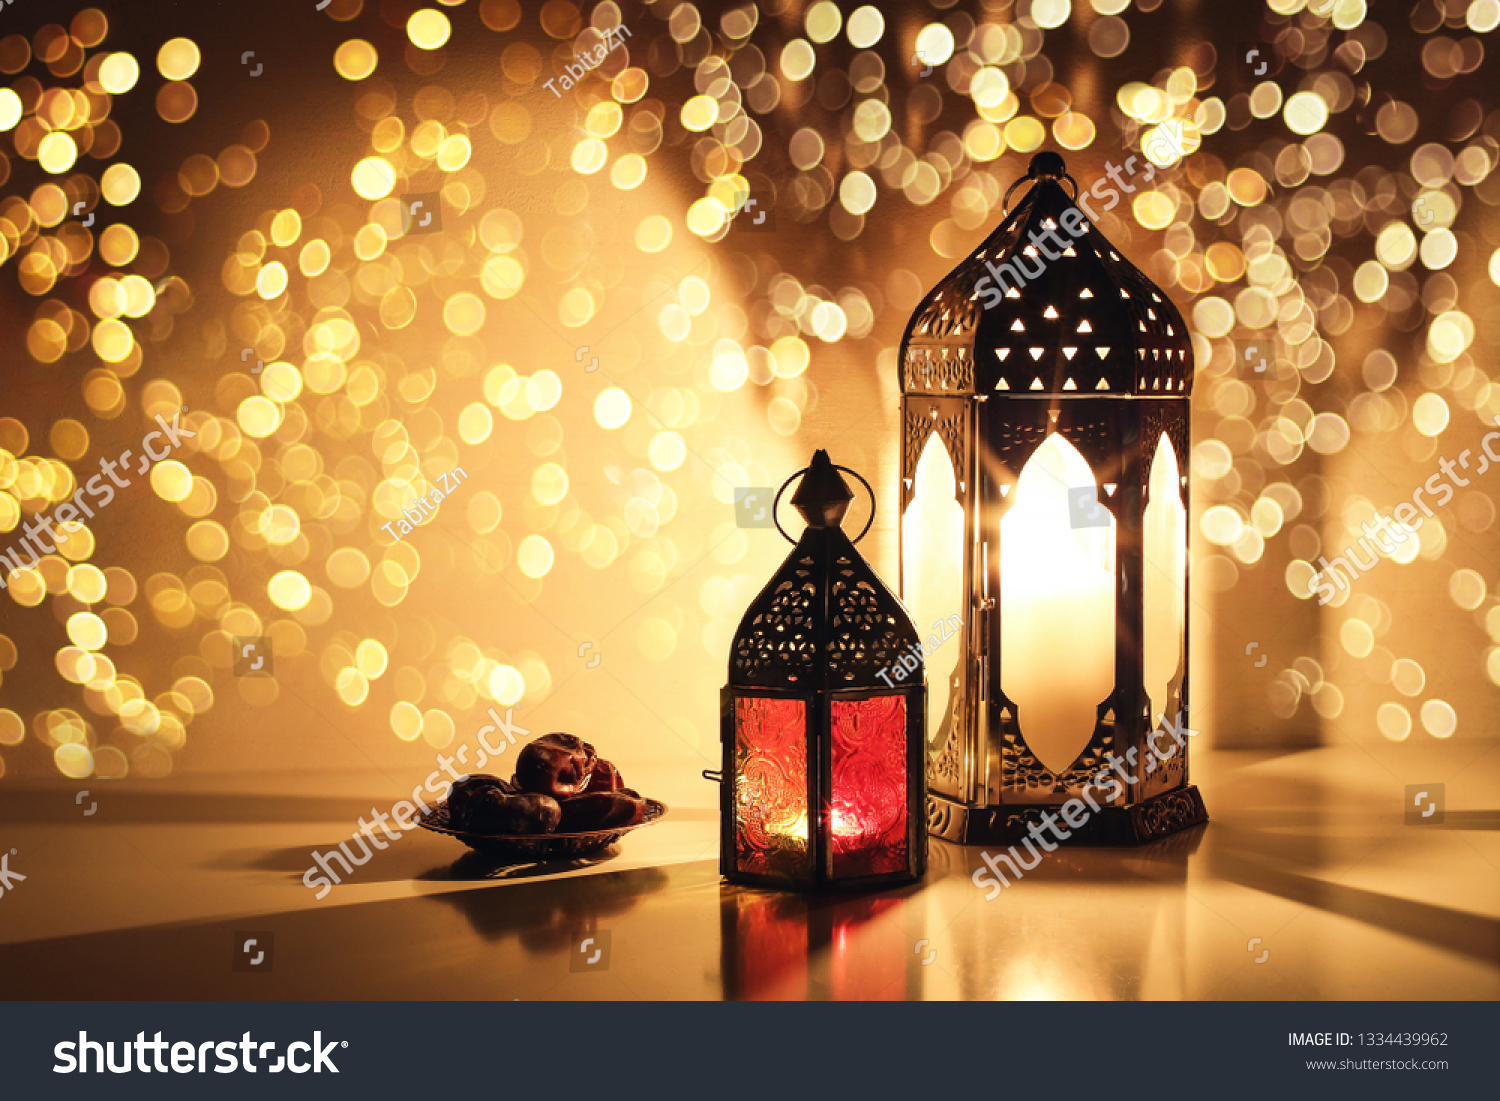 Ornamental Arabic lanterns with burning candles. Glittering golden bokeh lights. Plate with date fruit on the table. Greeting card for Muslim holiday Ramadan Kareem. Iftar dinner background. #1334439962